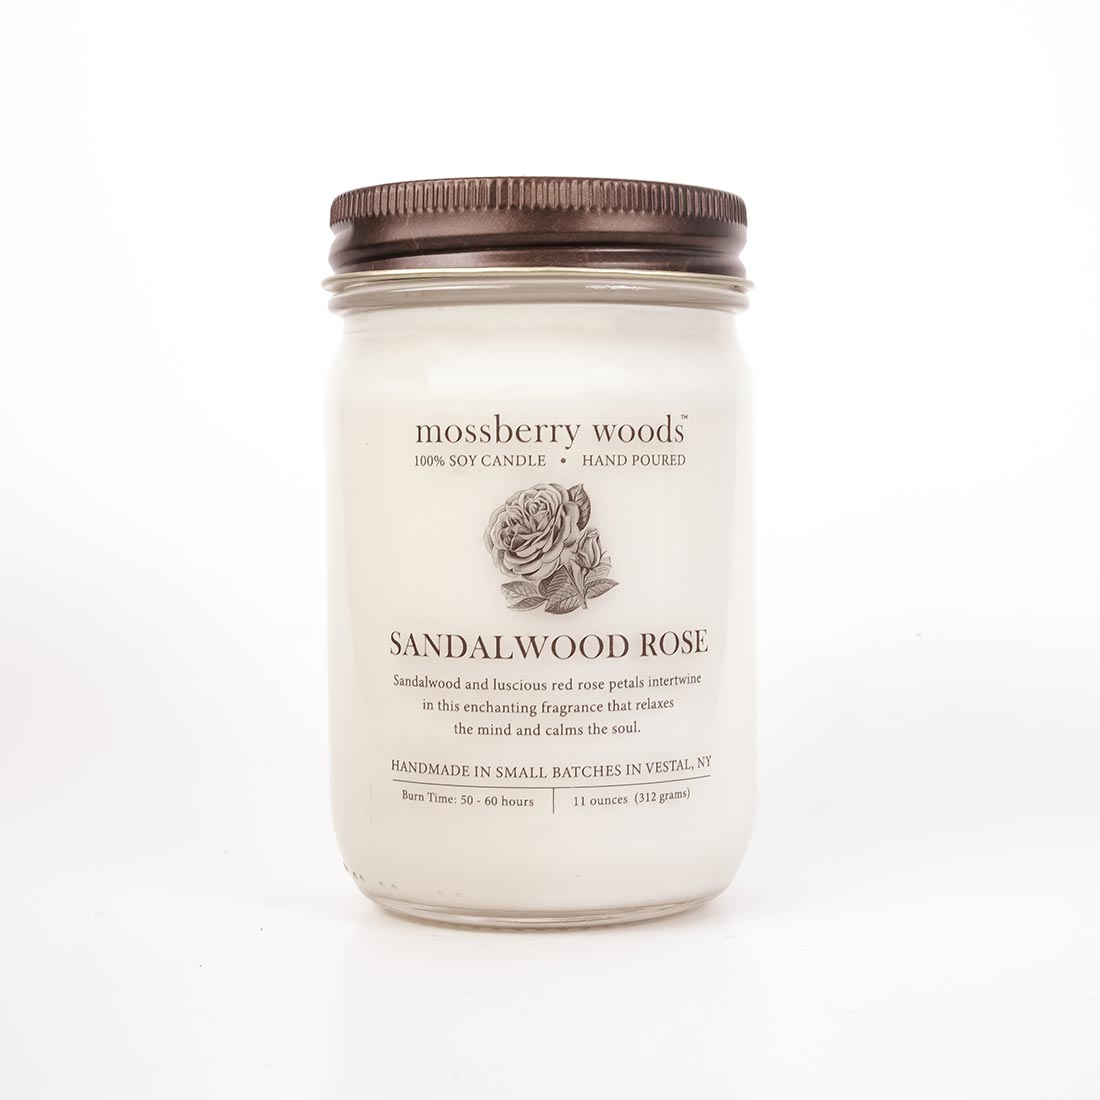 Sandalwood Rose soy candle in a mason jar with a rustic brown metal twist lid